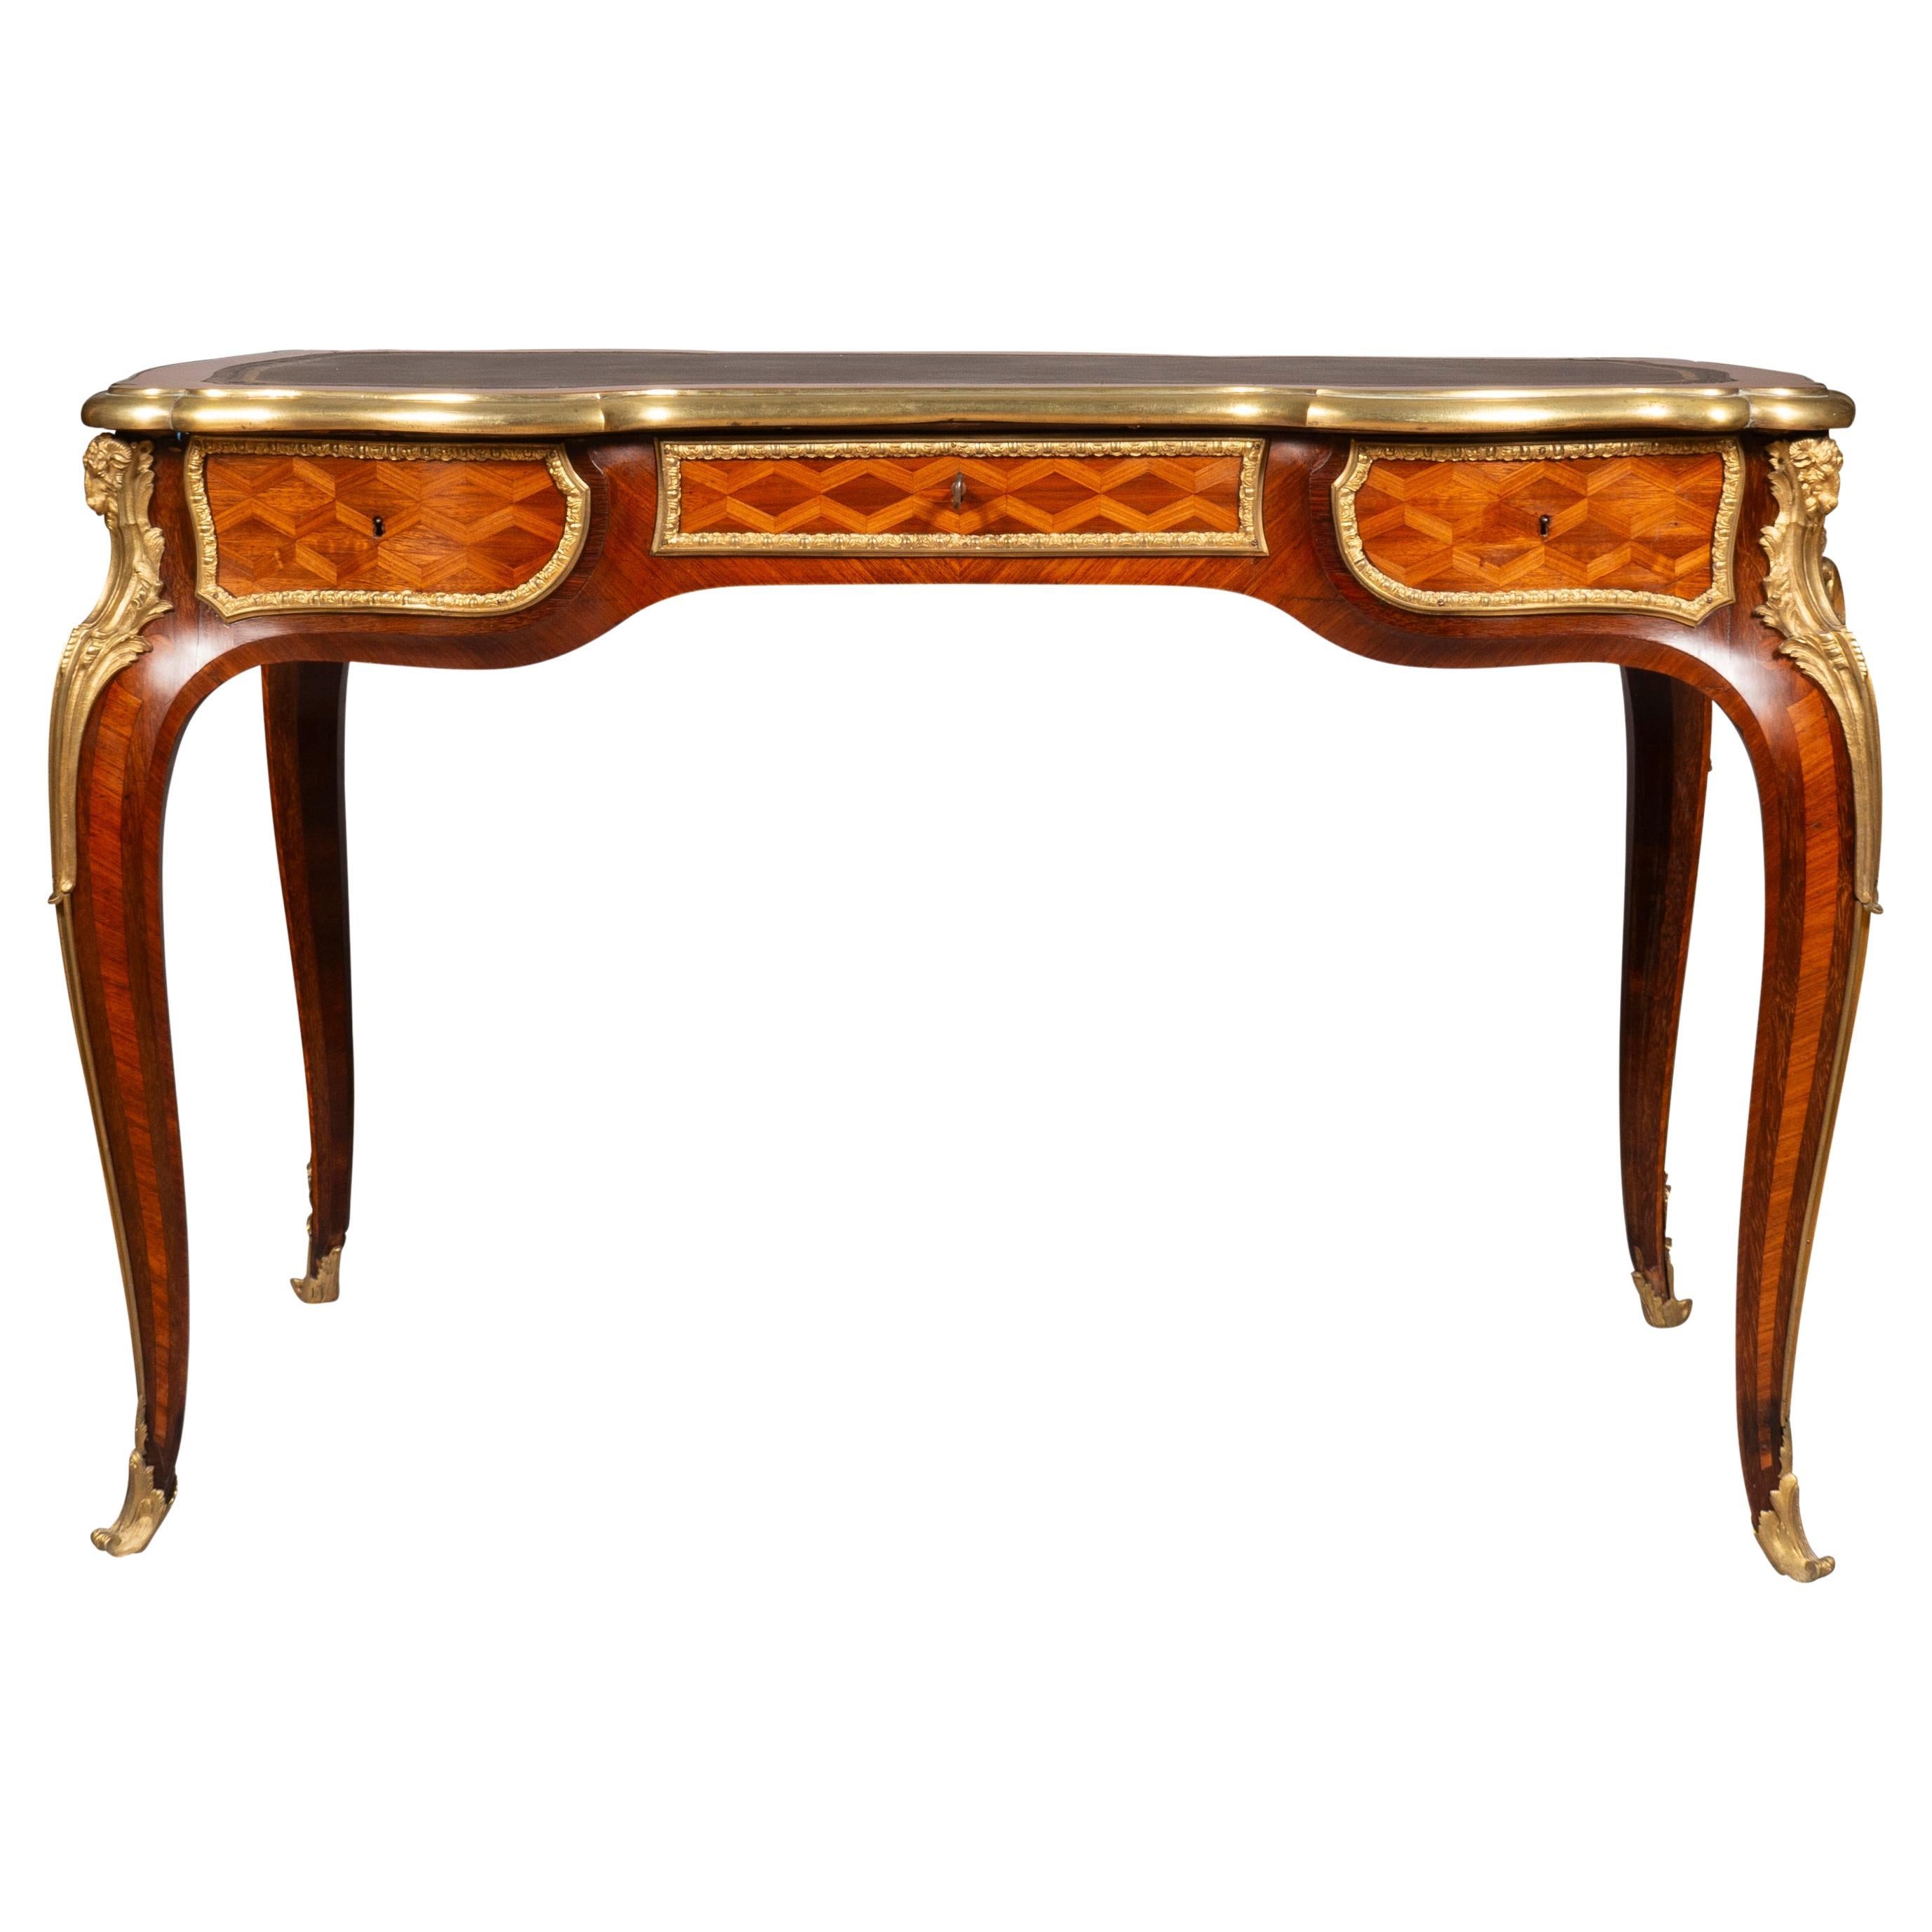 The identical desk and possibly the same one pictured in Les Ebenistes Du XIX Siecle by Denise Ledoux-Lebard. Page 621. Provenance Sothebys London November 27th 1964. A fine desk newly restored with new leather. Purchased from a Palm Beach estate.